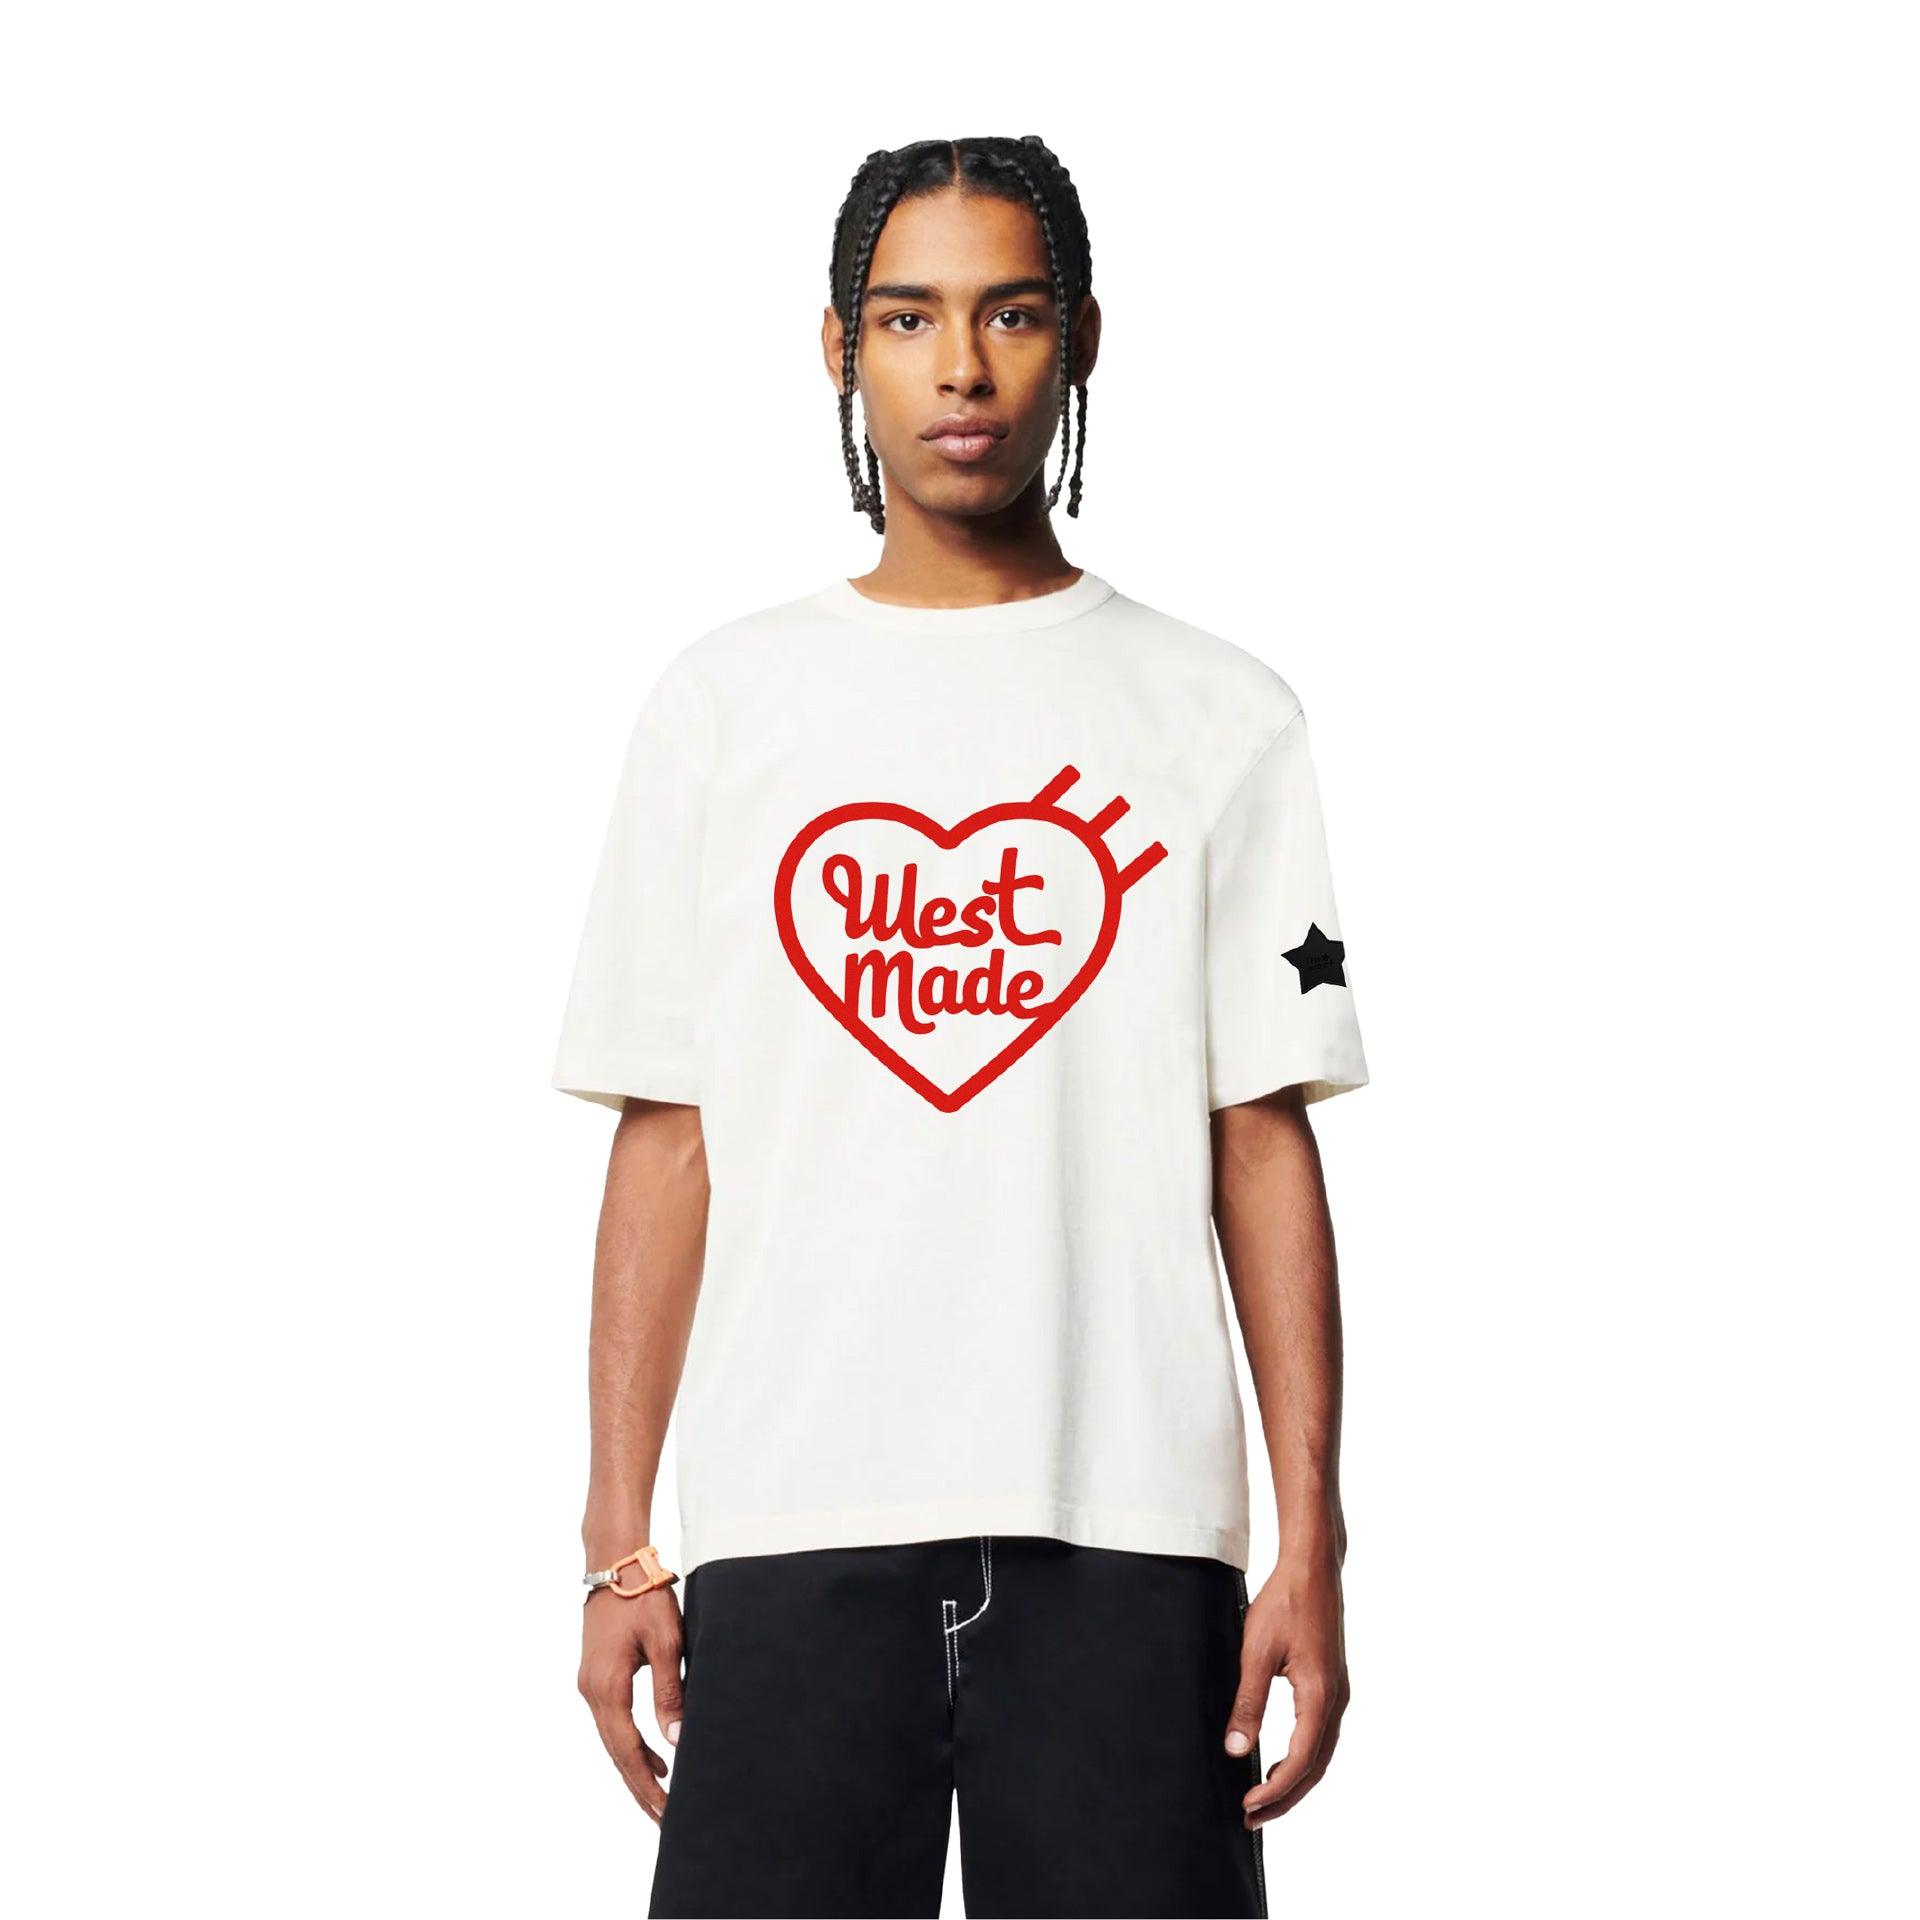 White T-shirt With West Made Heart print From I'm West - WECRE8